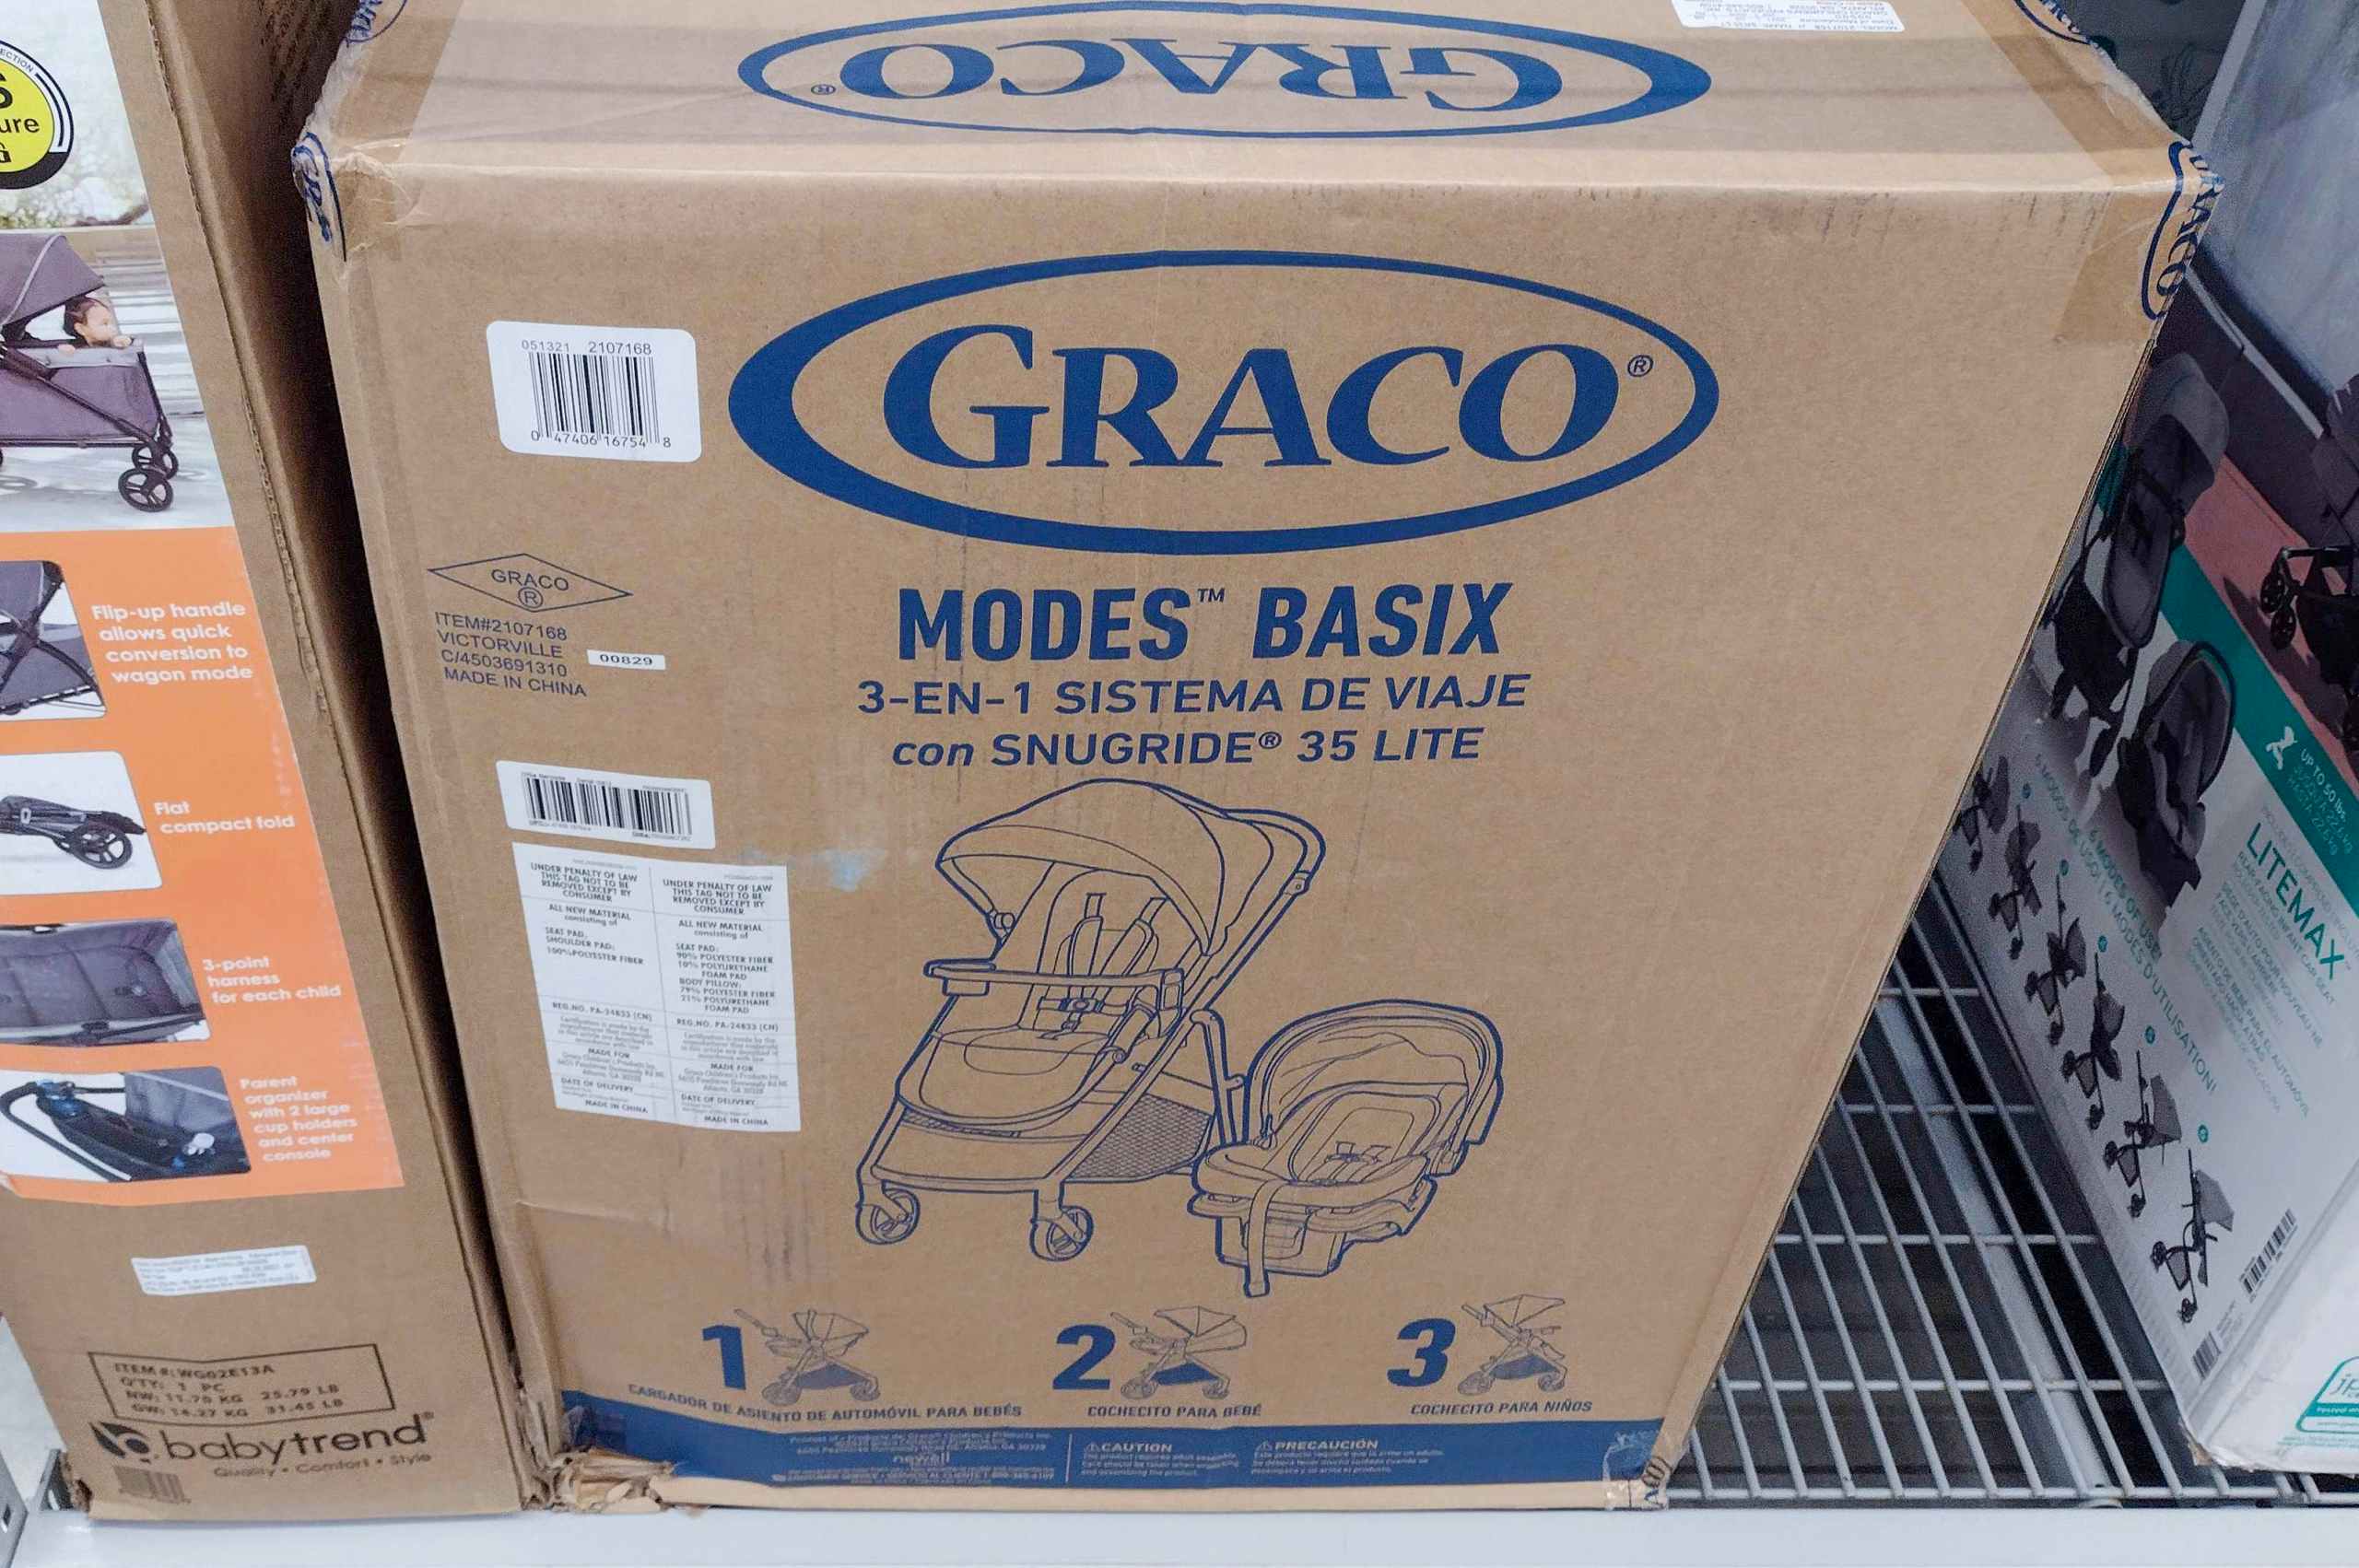 Graco Stroller Clearance at Walmart